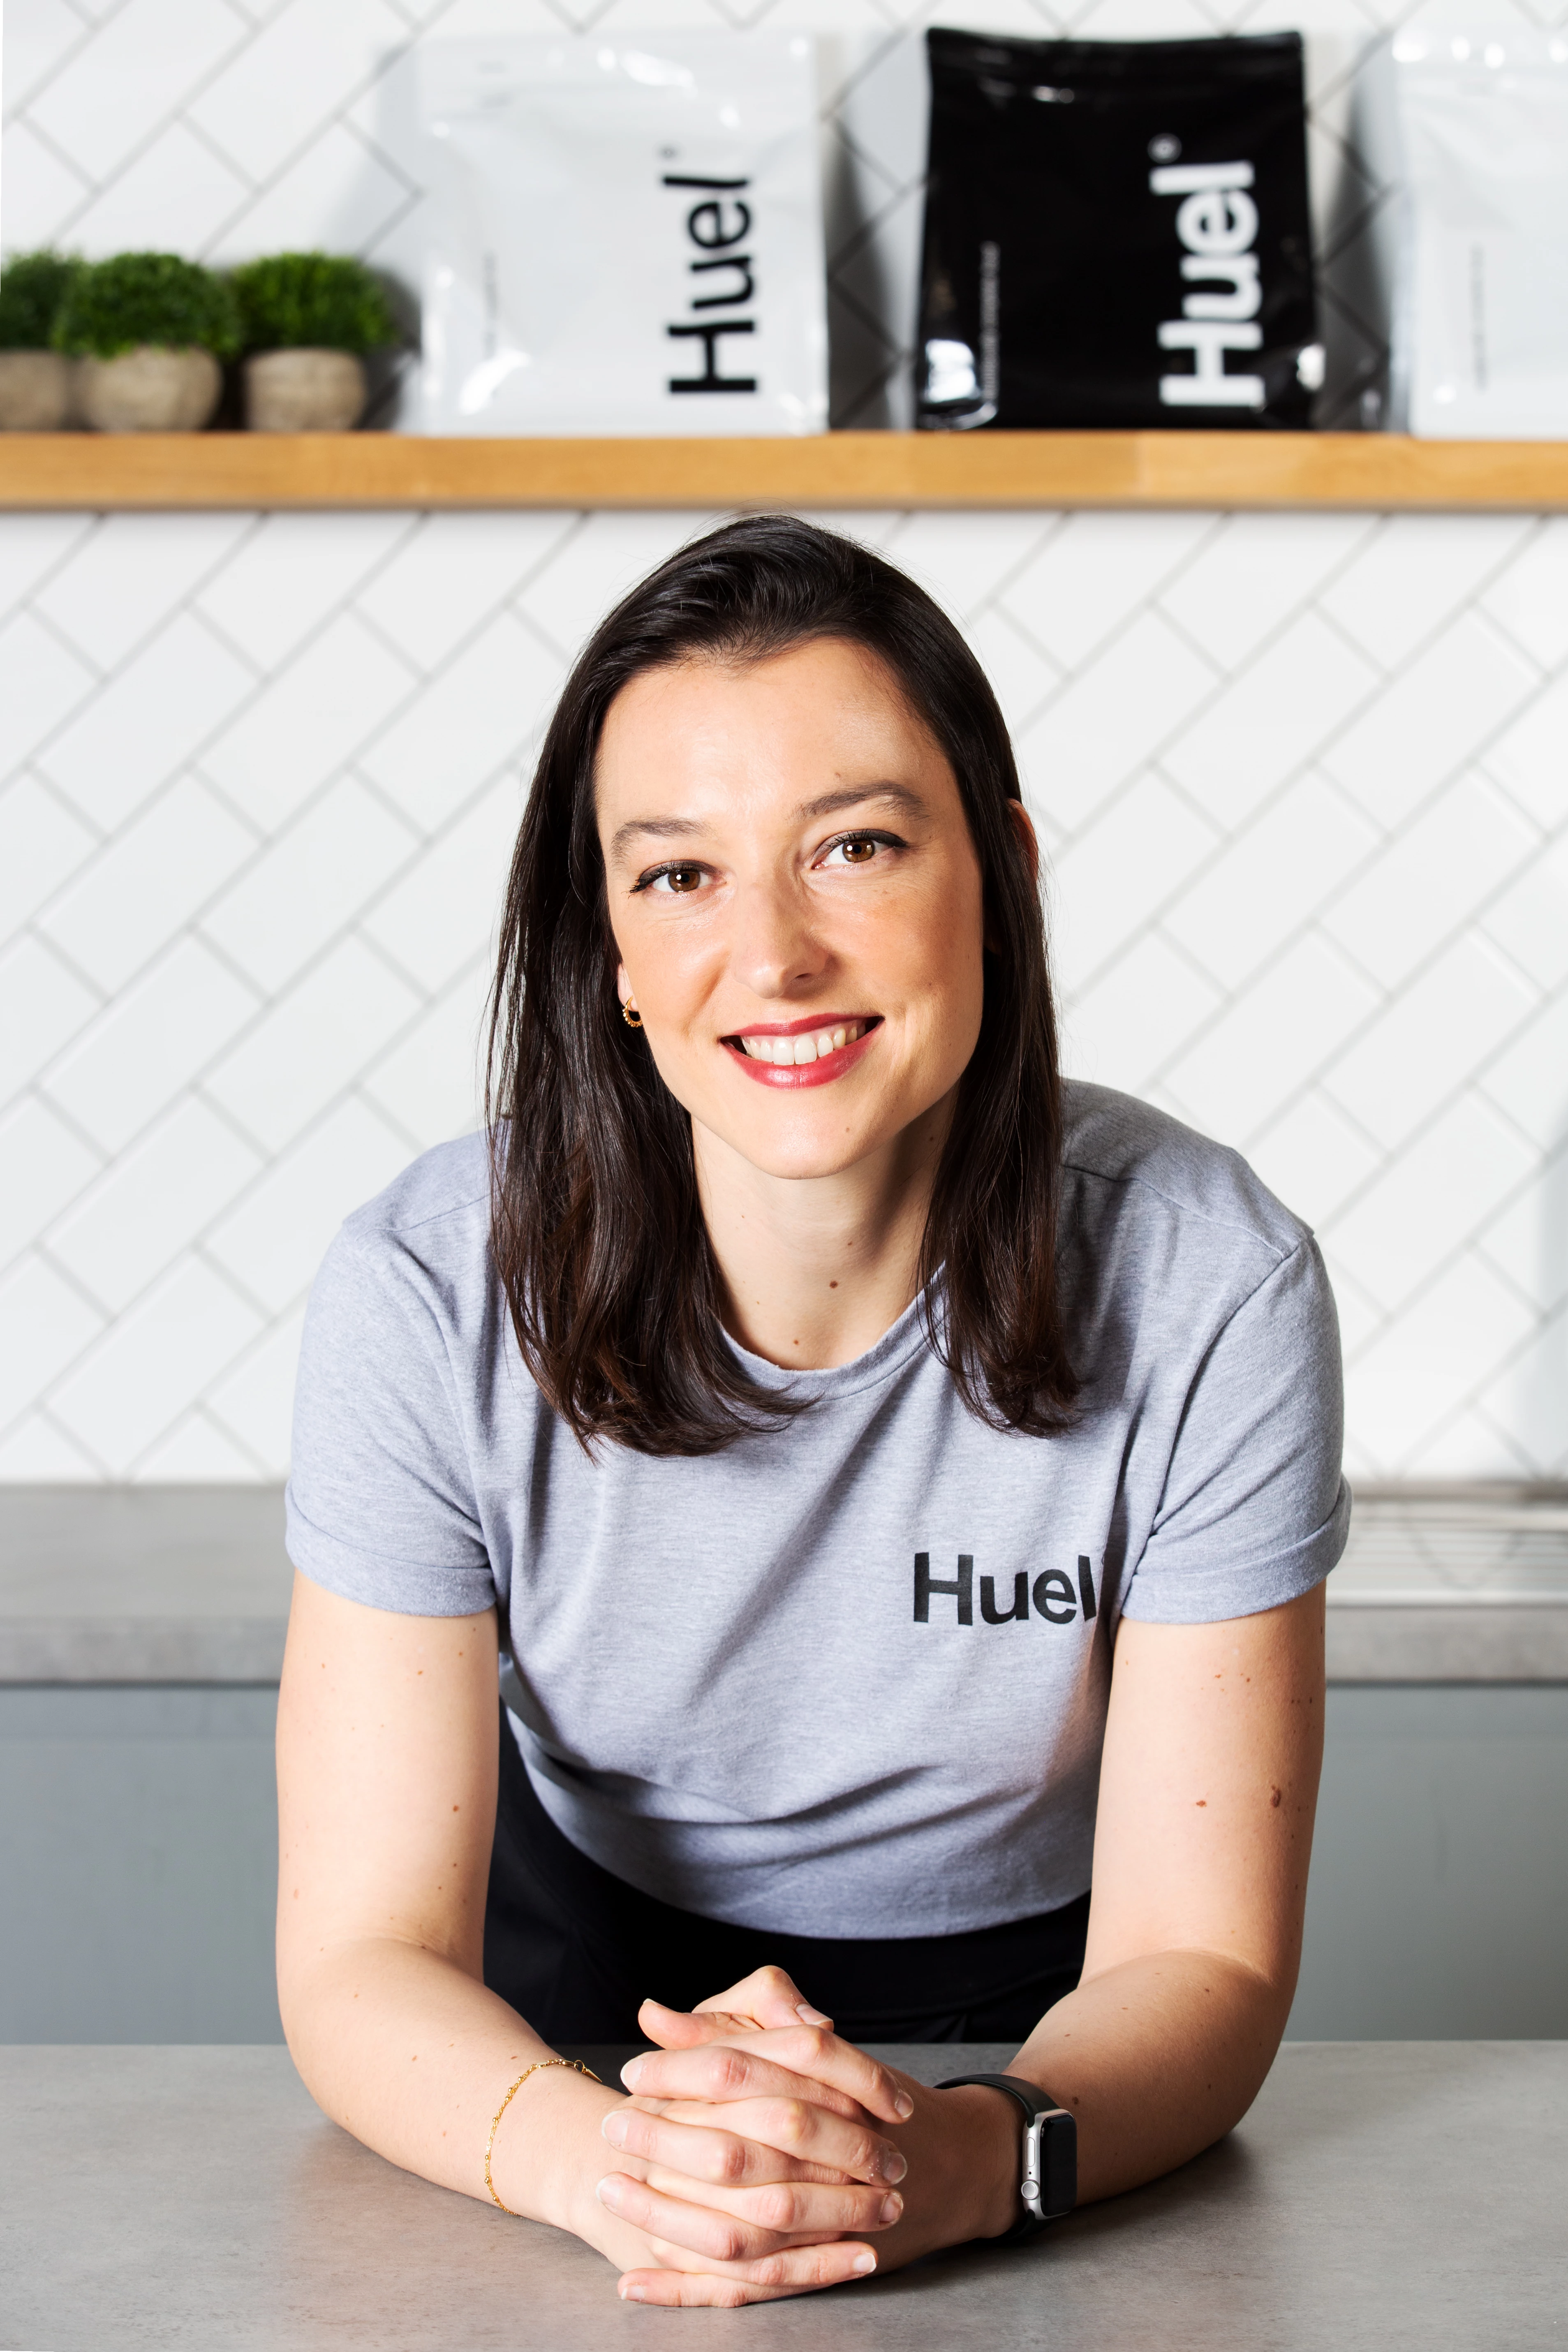 Huel appoints Lisa Marçais as Commercial Director